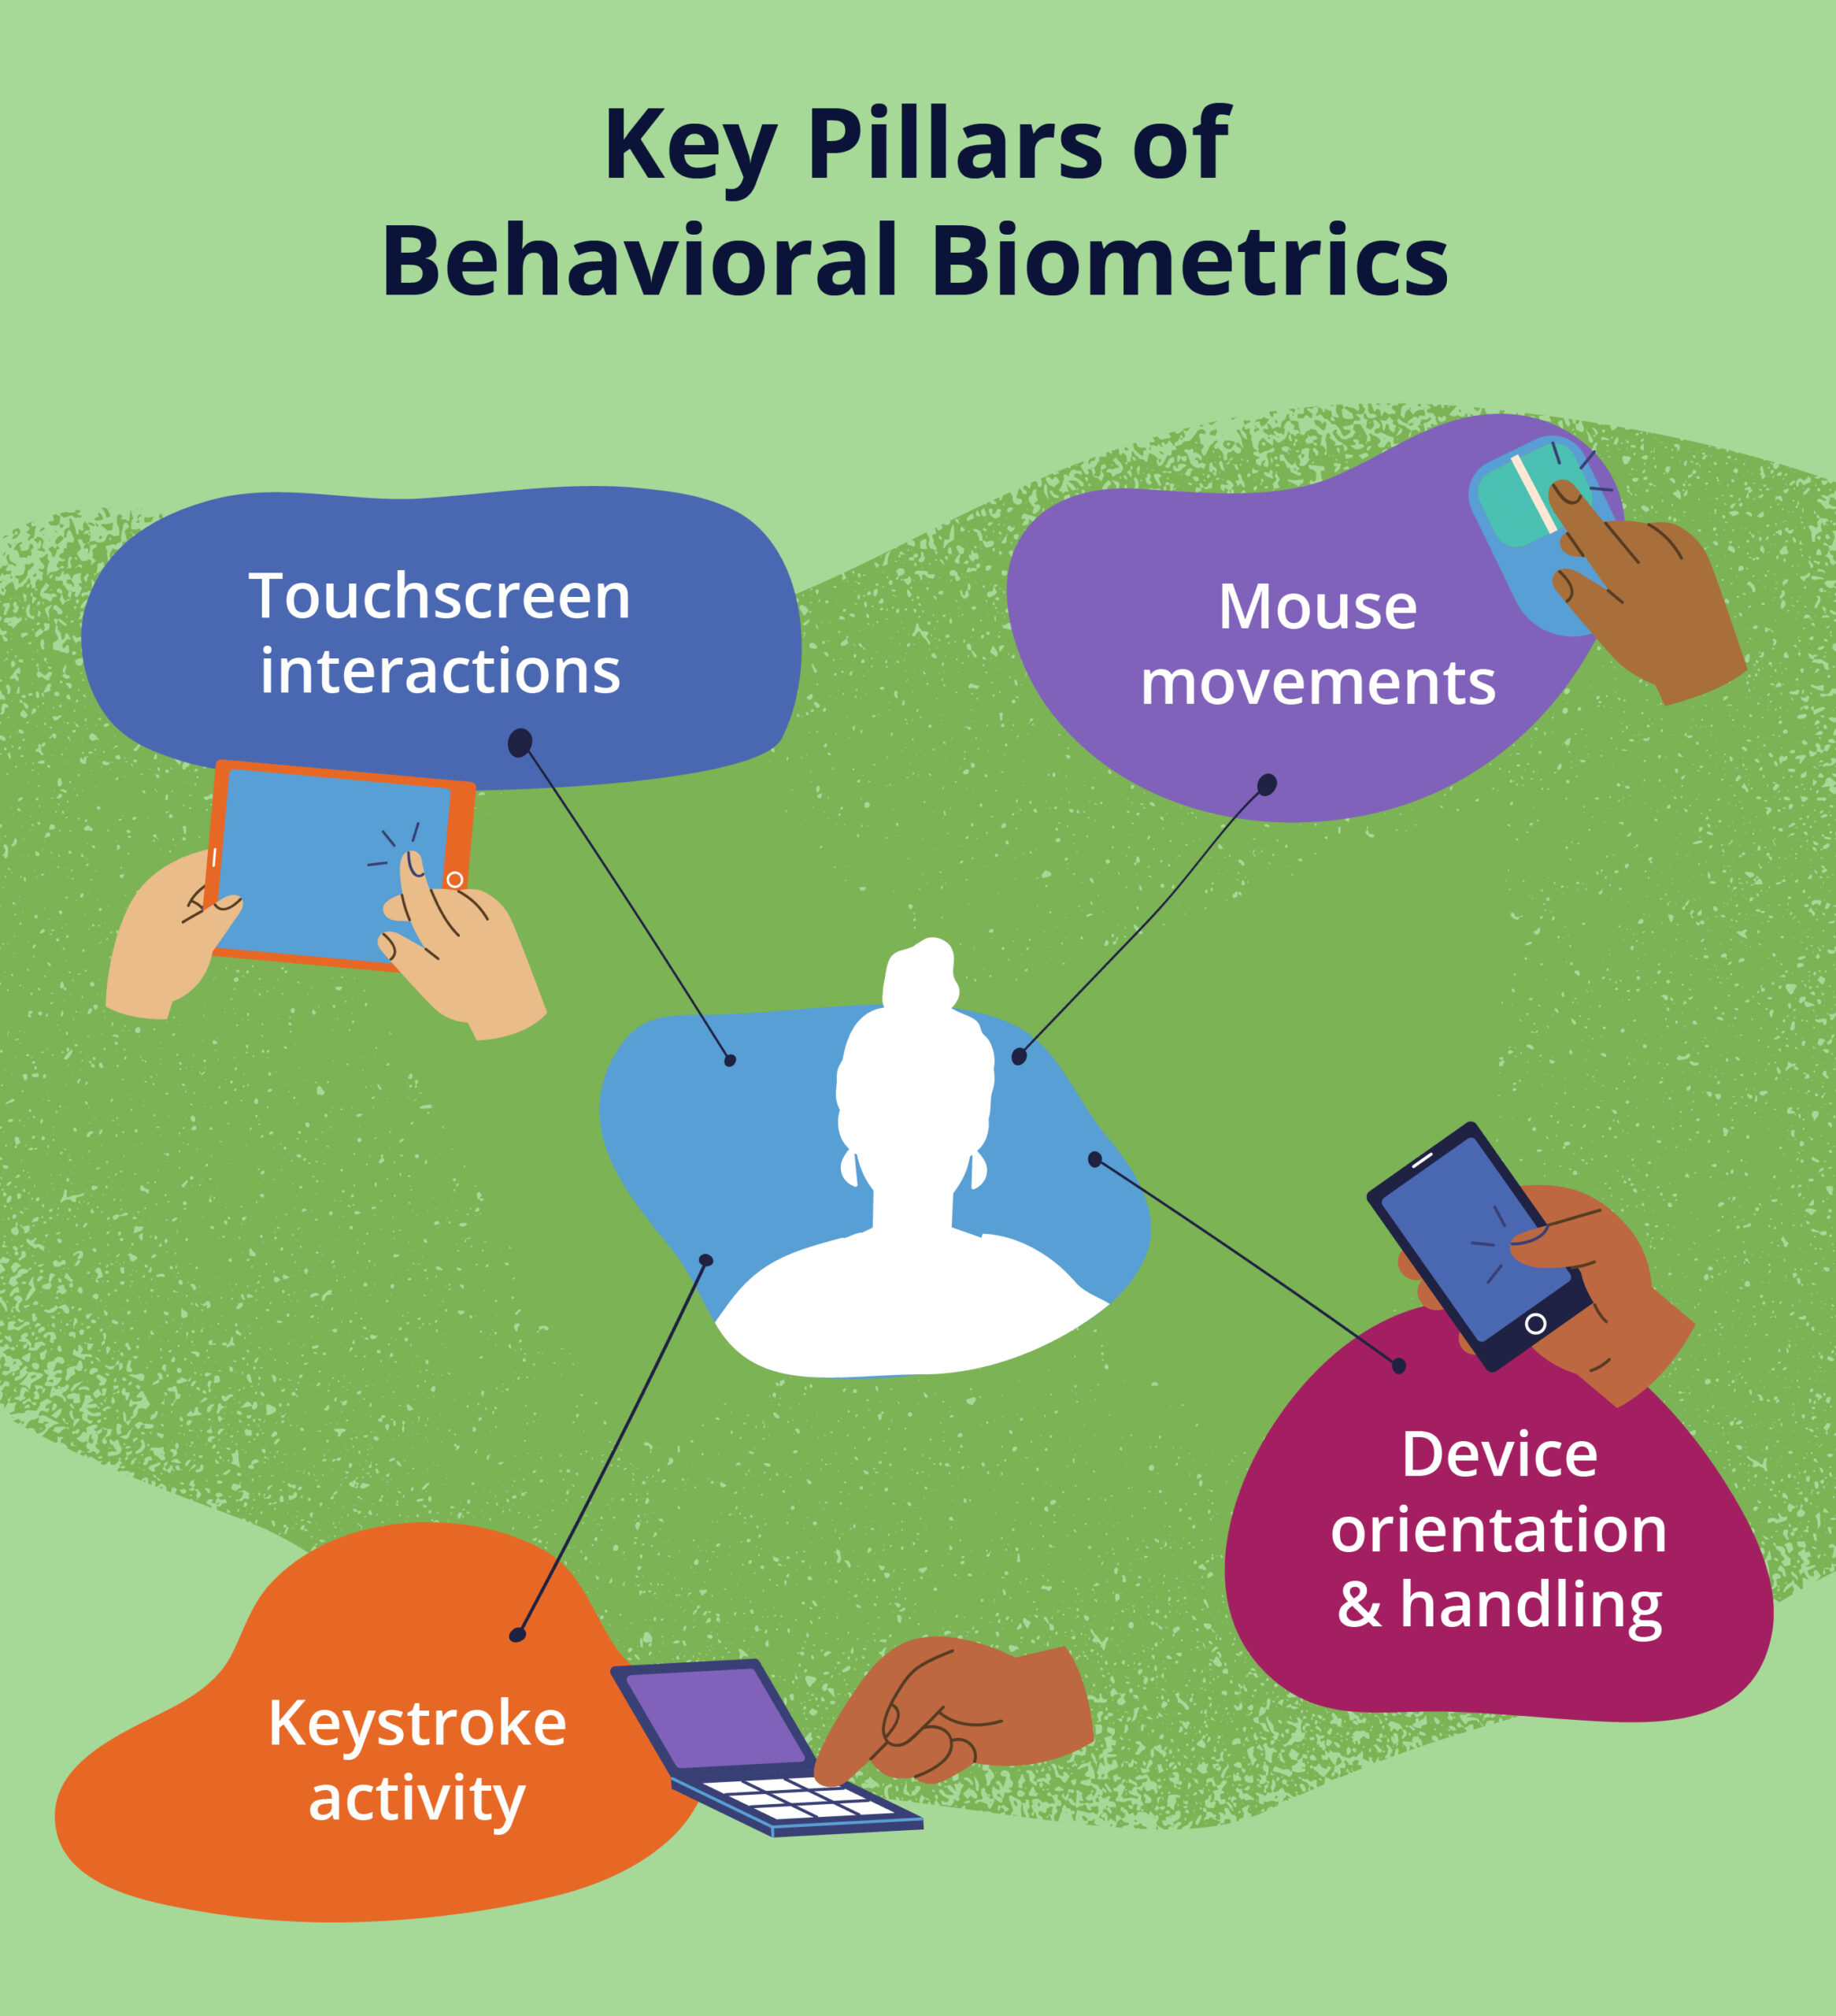 Image of key pillars of behavioral biometrics, touchscreen interactions, keystroke activity, mouse movements, and device orientation and handling